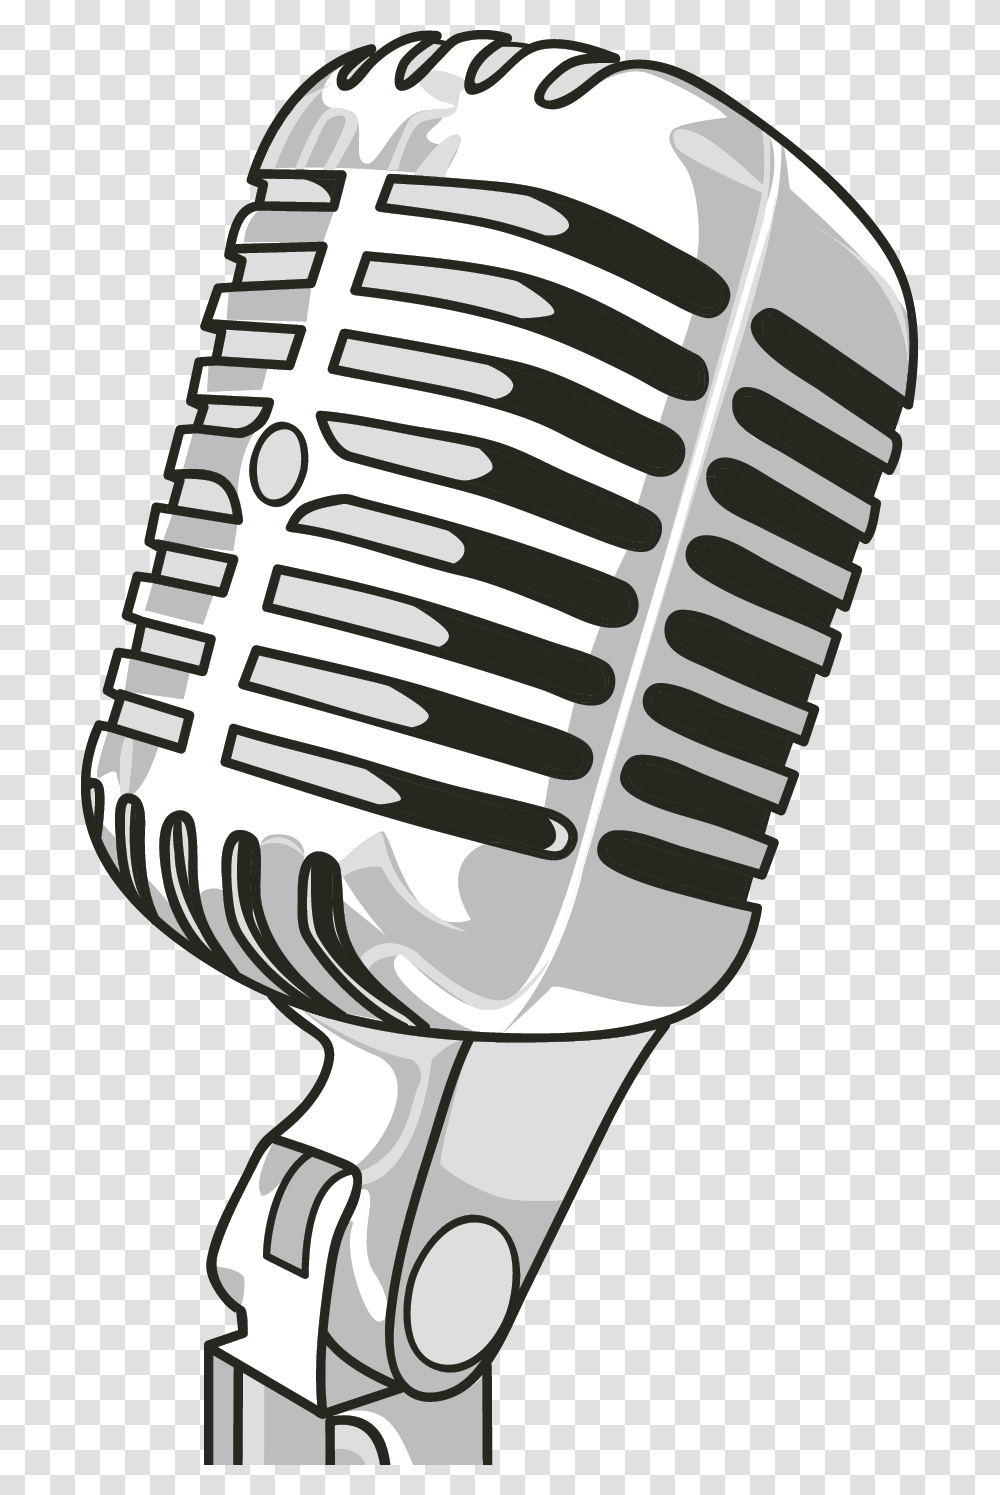 Radio Microphone Clip Art Microphone Clipart, Electrical Device Transparent Png